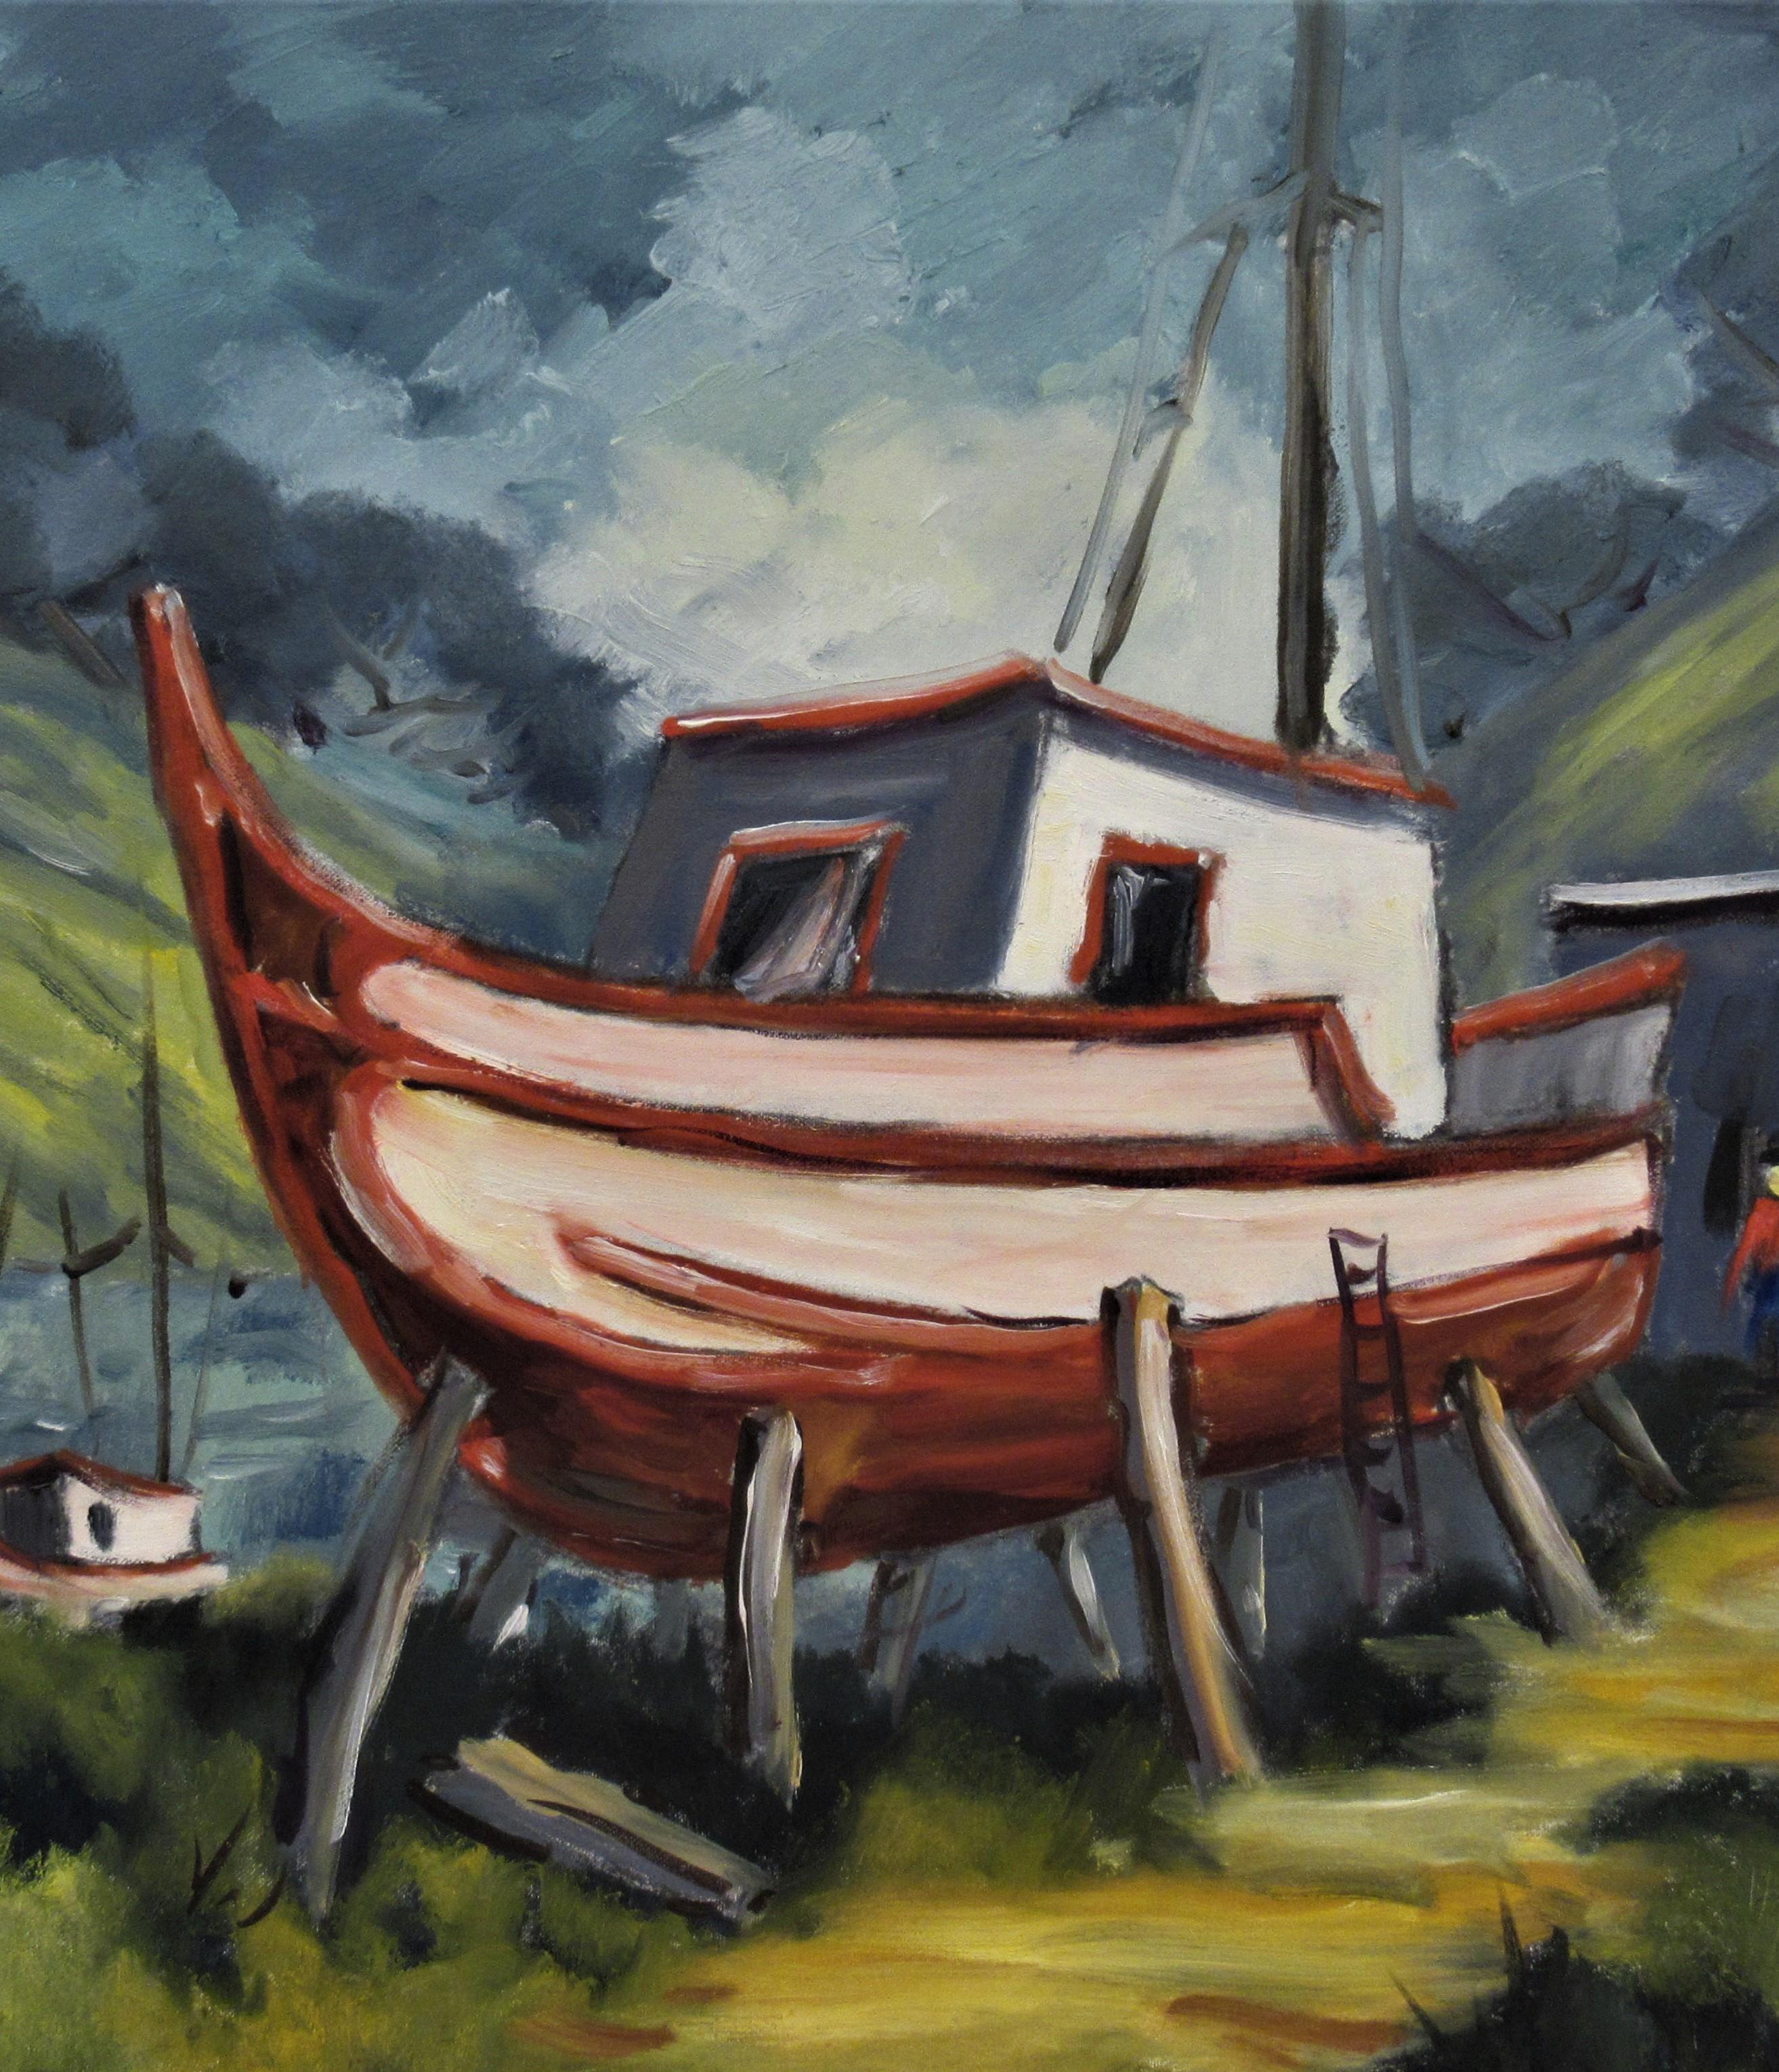 Landscape with Boats - Painting by Clifford Holmes